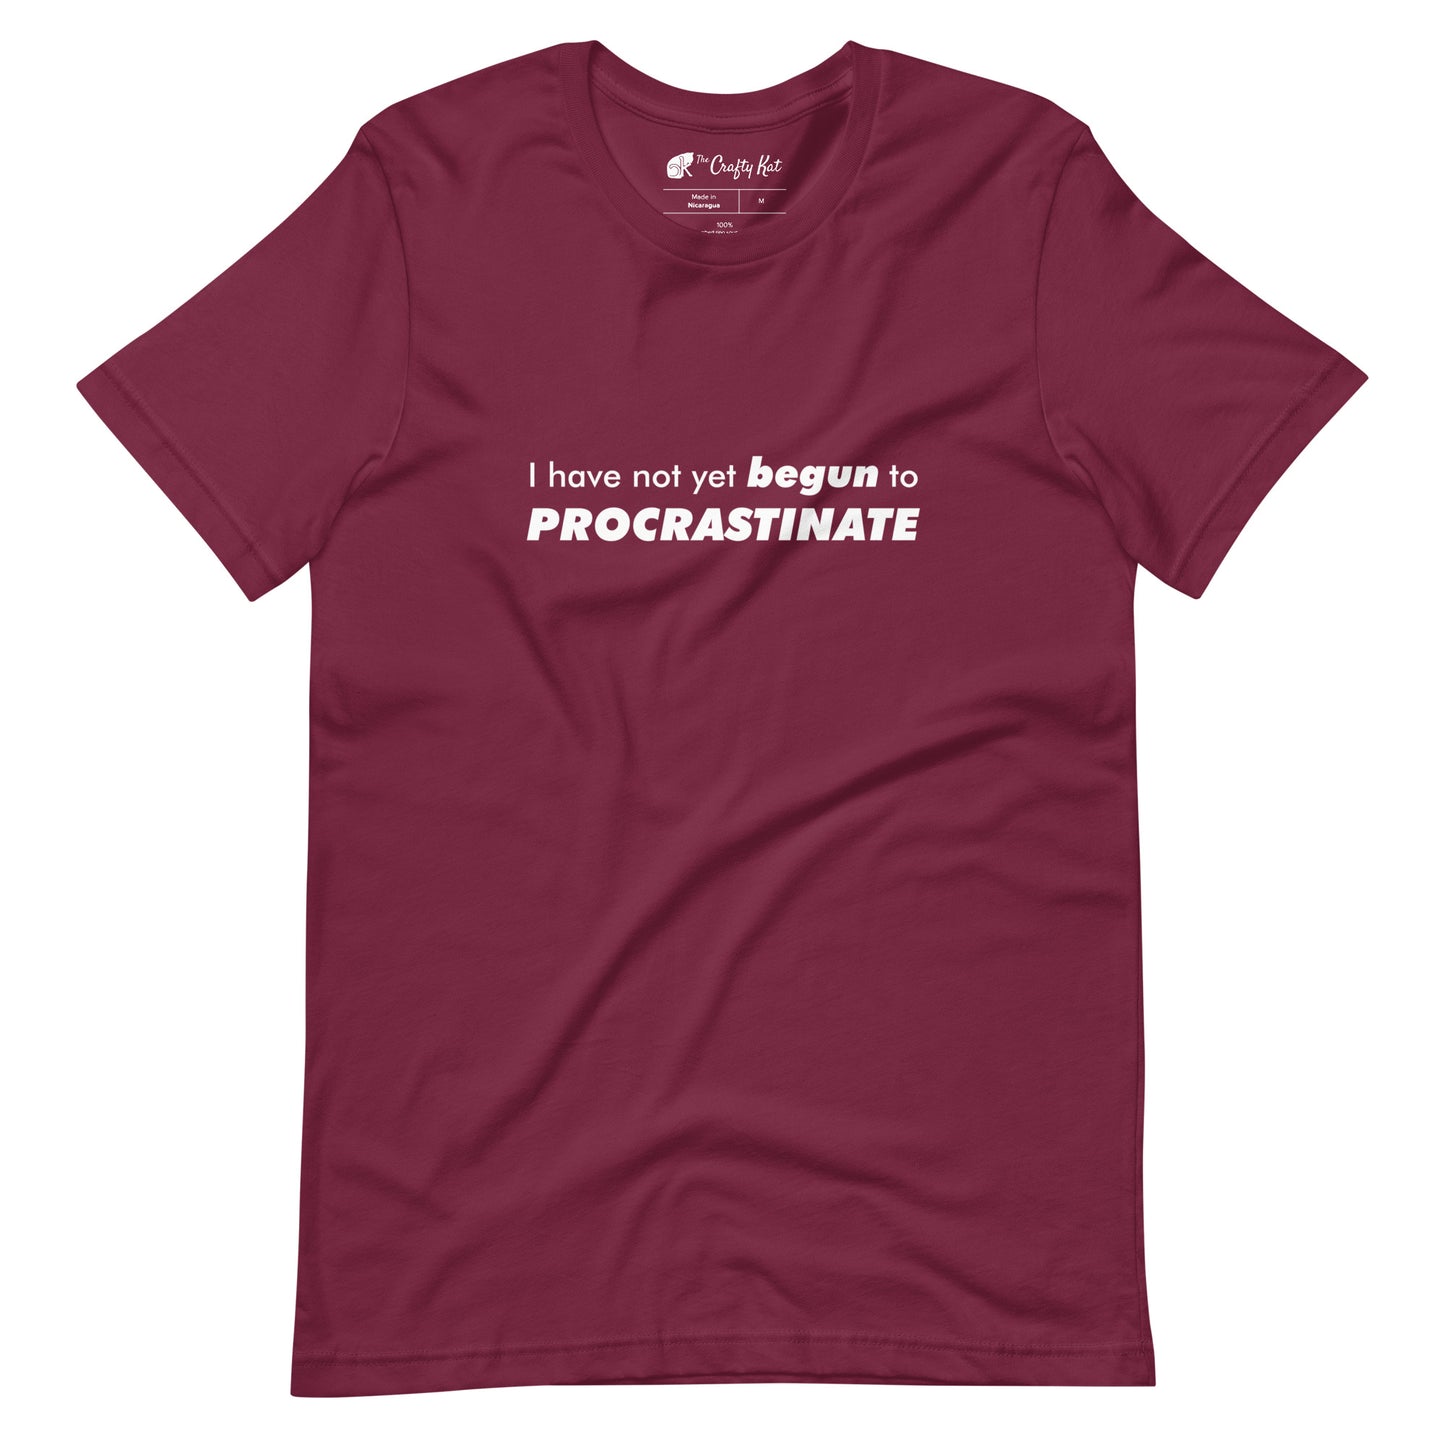 Maroon t-shirt with text graphic: "I have not yet BEGUN to PROCRASTINATE"